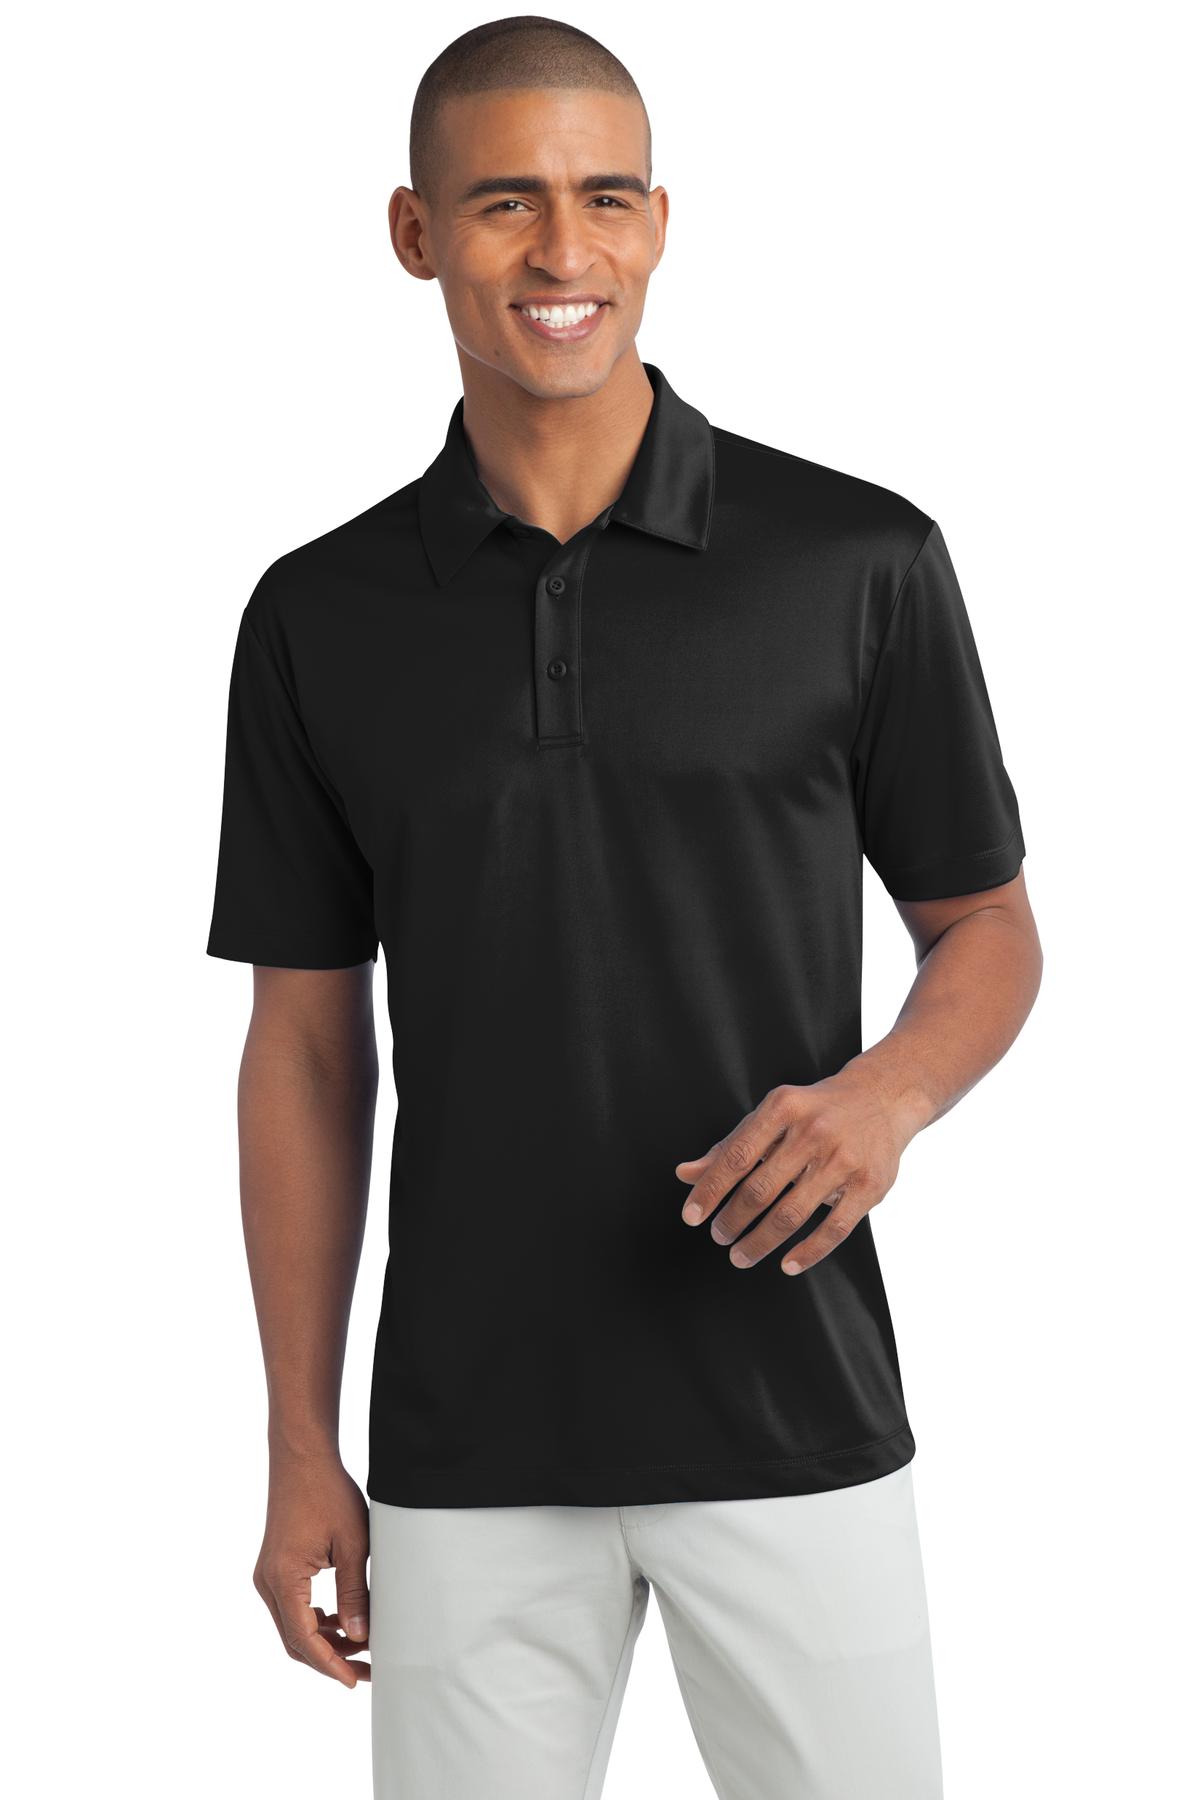 Port Authority® Silk Touch Performance Polo.-Port Authority